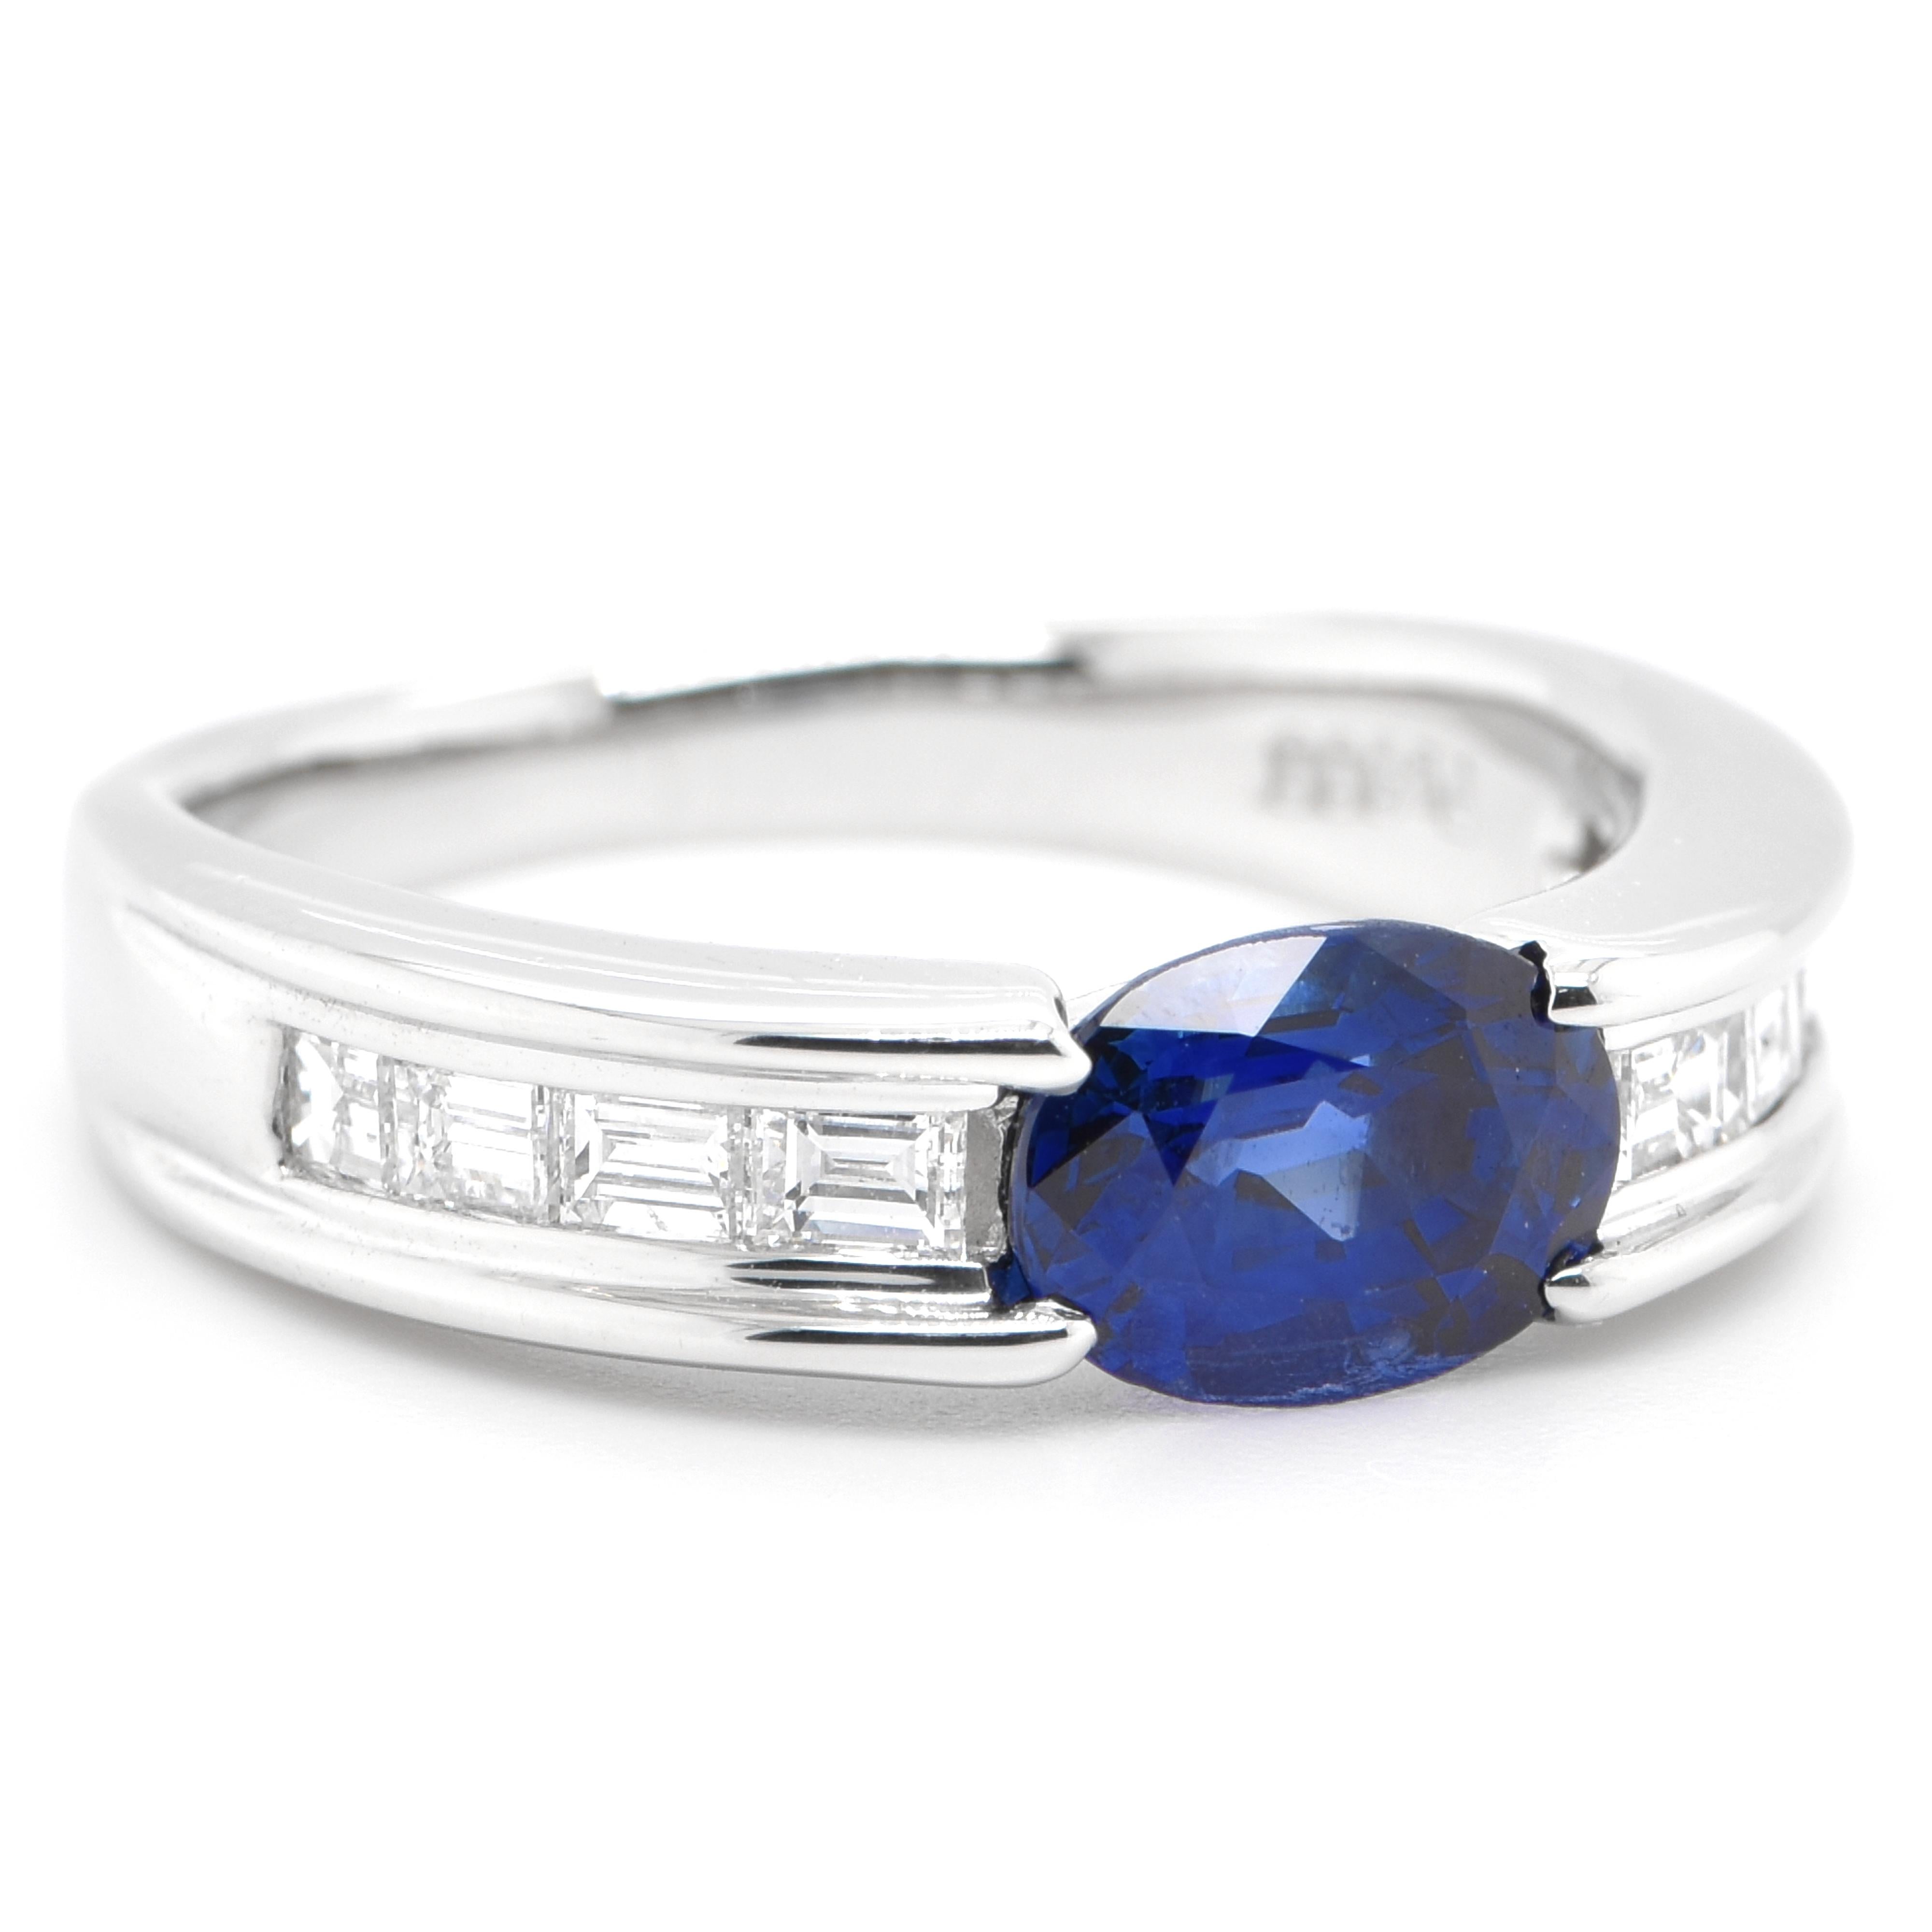 Modern 1.53 Carat Natural Blue Sapphire and Diamond Band Ring Set in Platinum